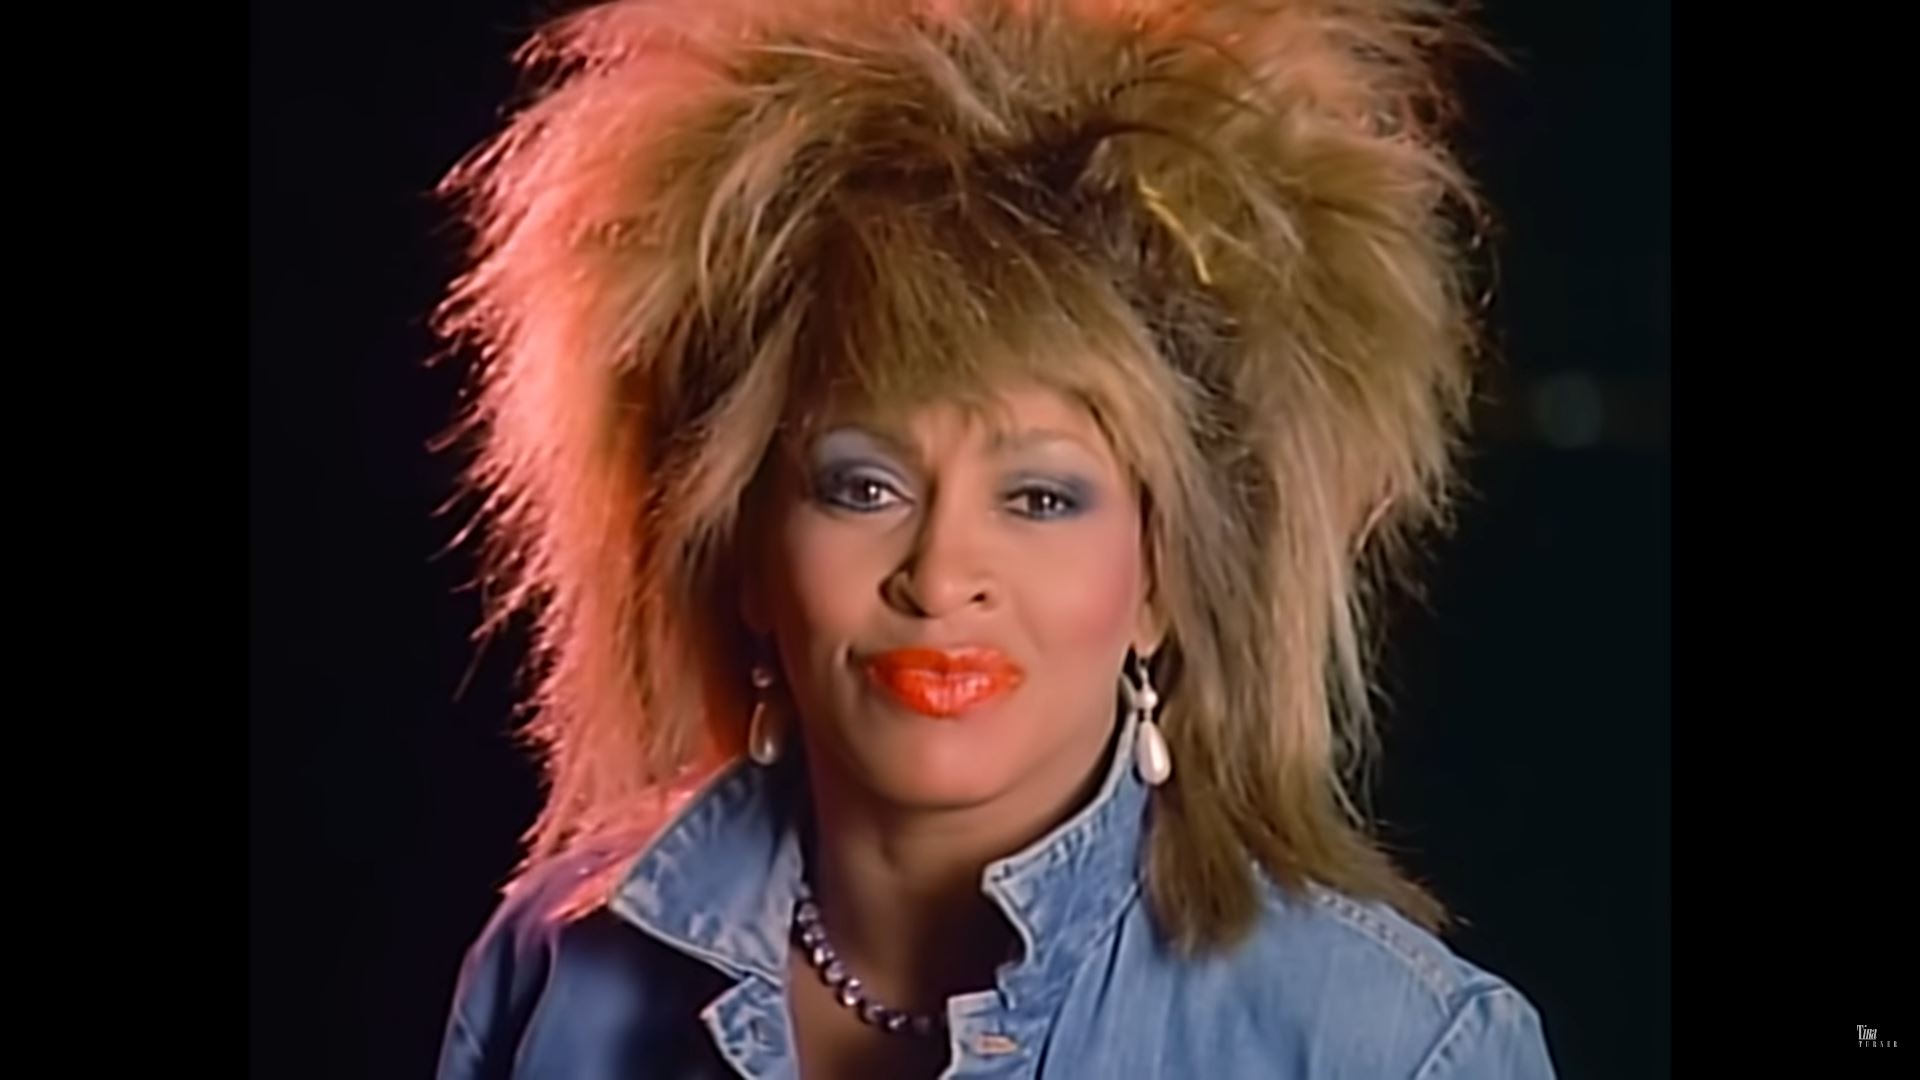 Singer And Music Pioneer Tina Turner Dies At 83 That Hashtag Show